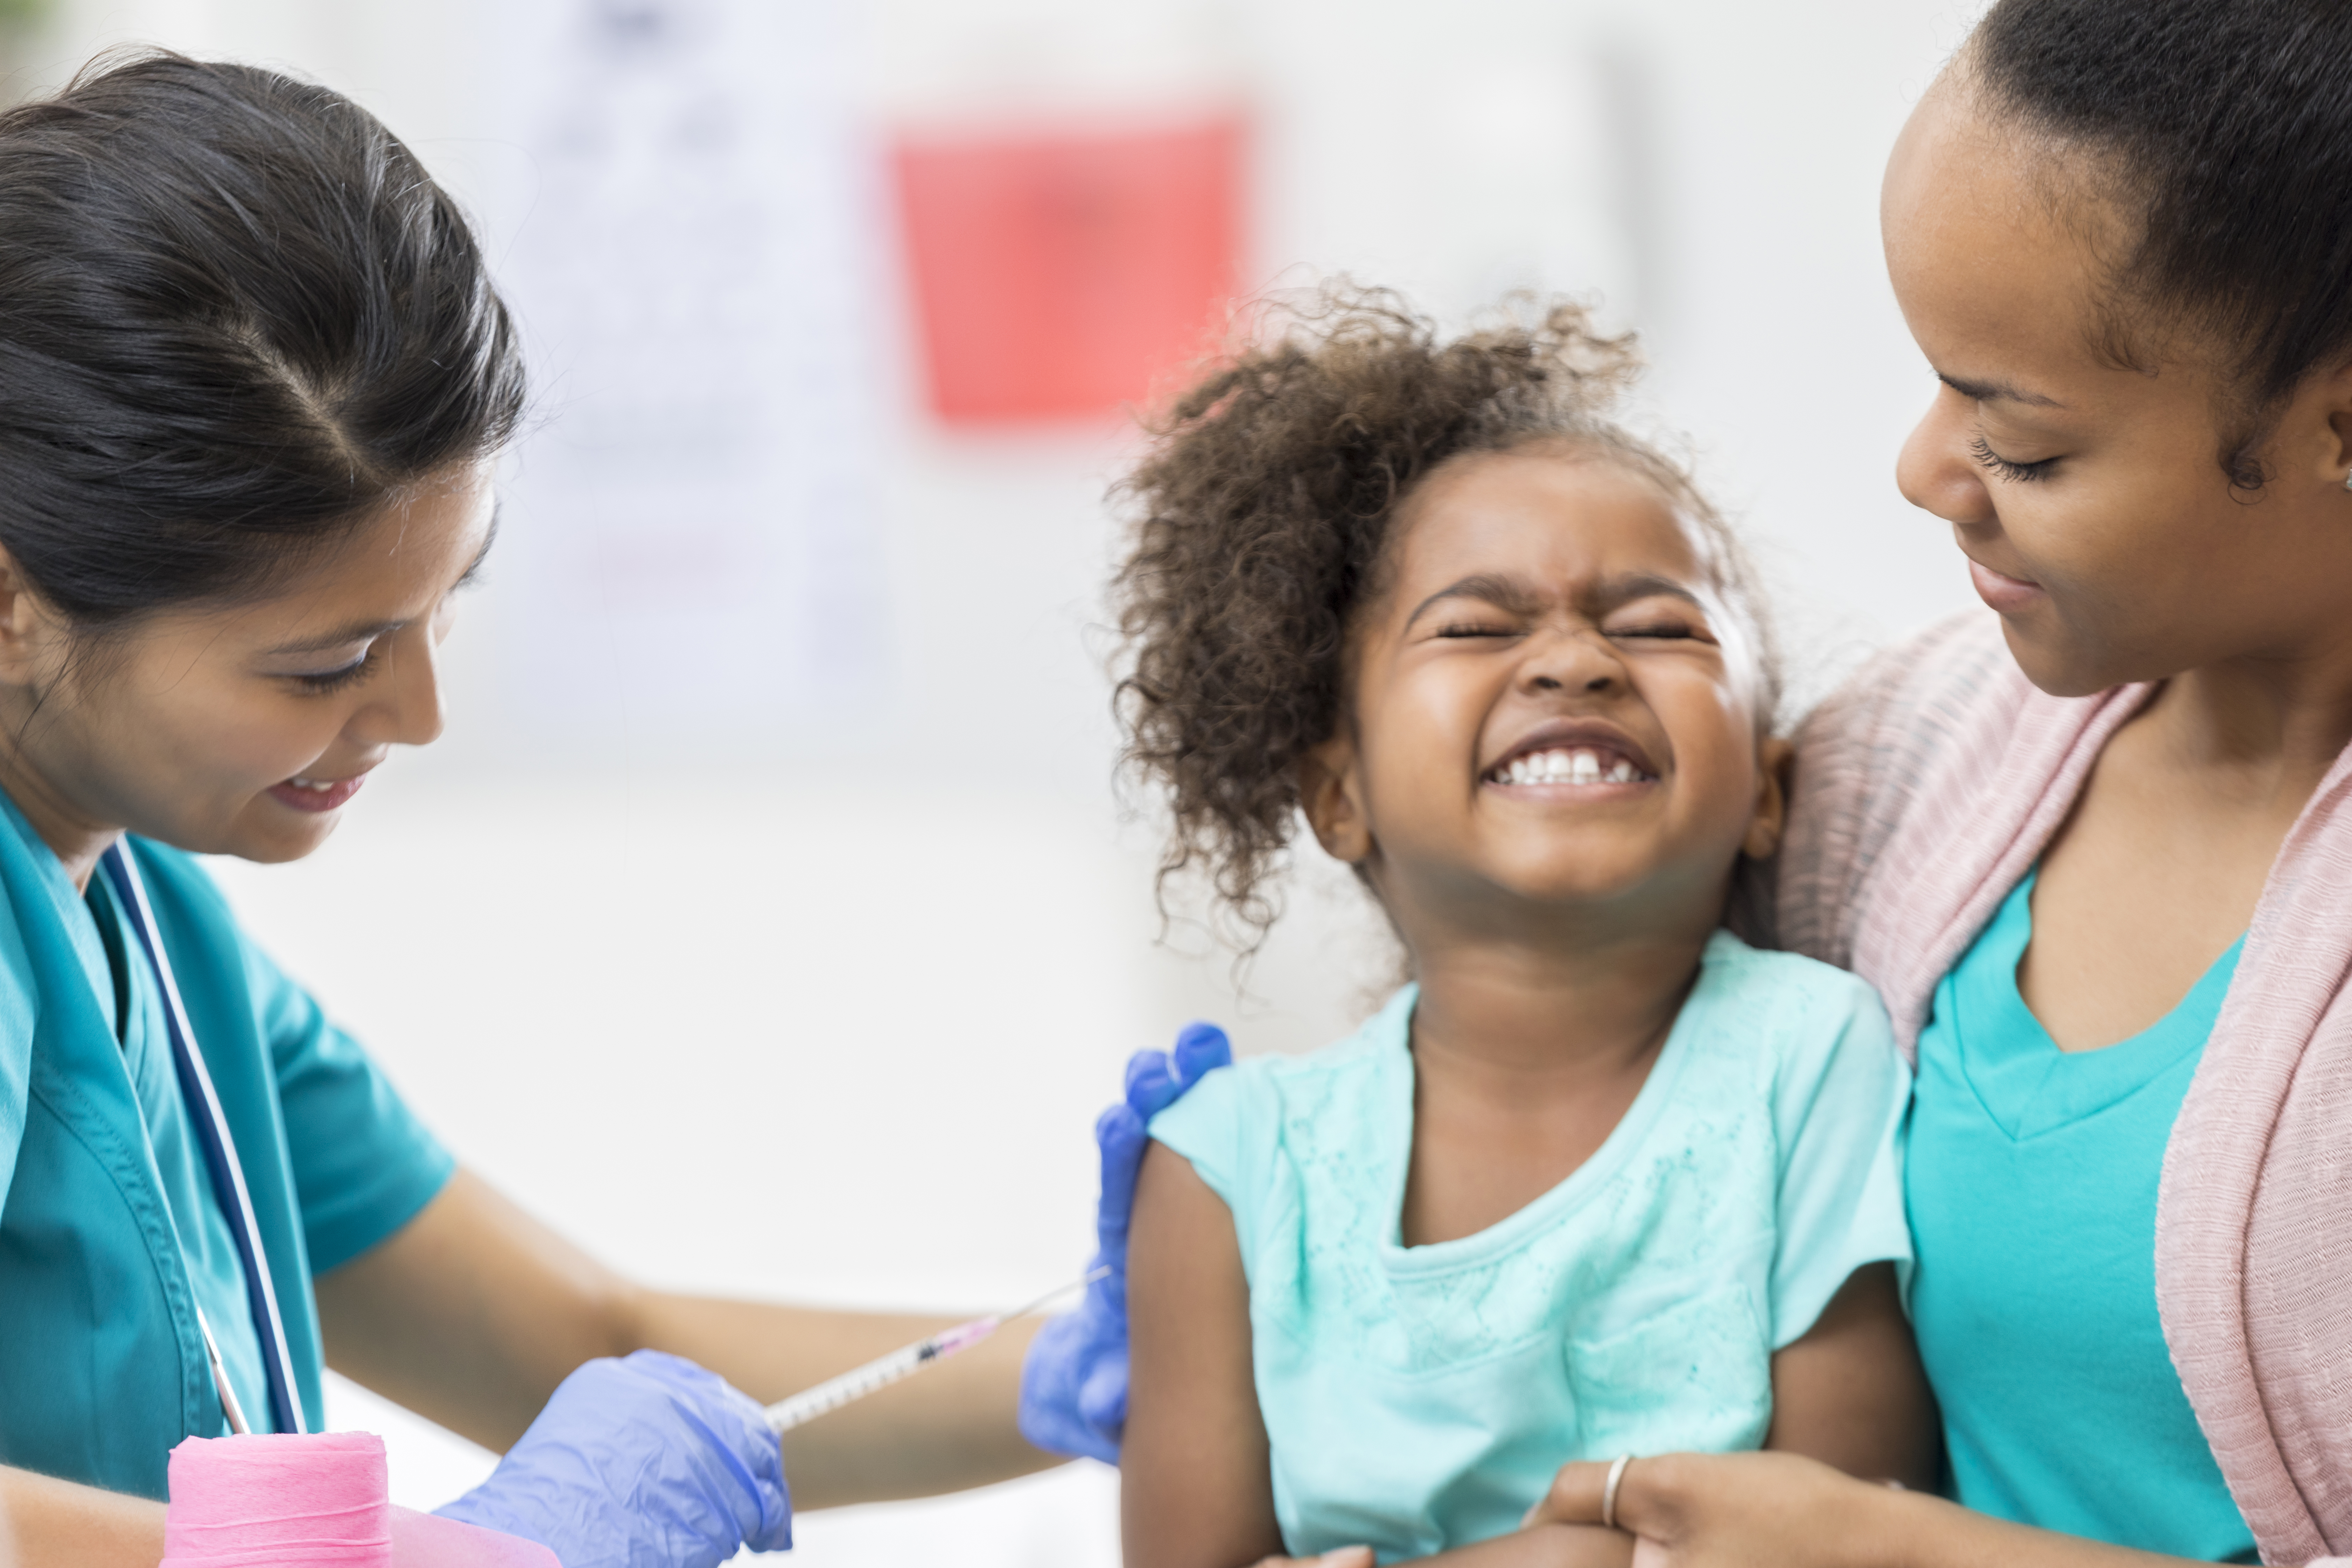 Young girl grimaces while getting a shot